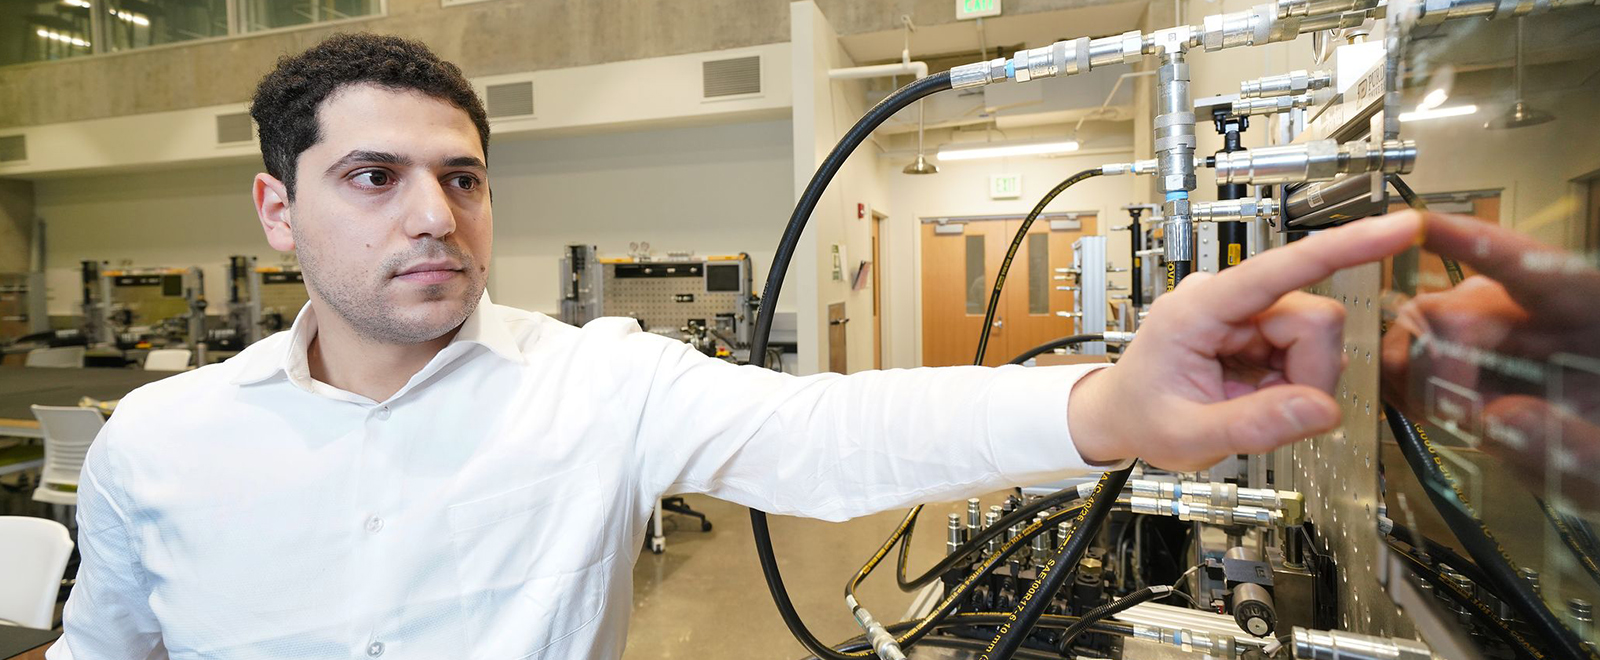 : ABE doctoral student Hassan Assaf is currently designing an electrohydraulic battery-powered system to replace the internal combustion engine in a hydraulic system